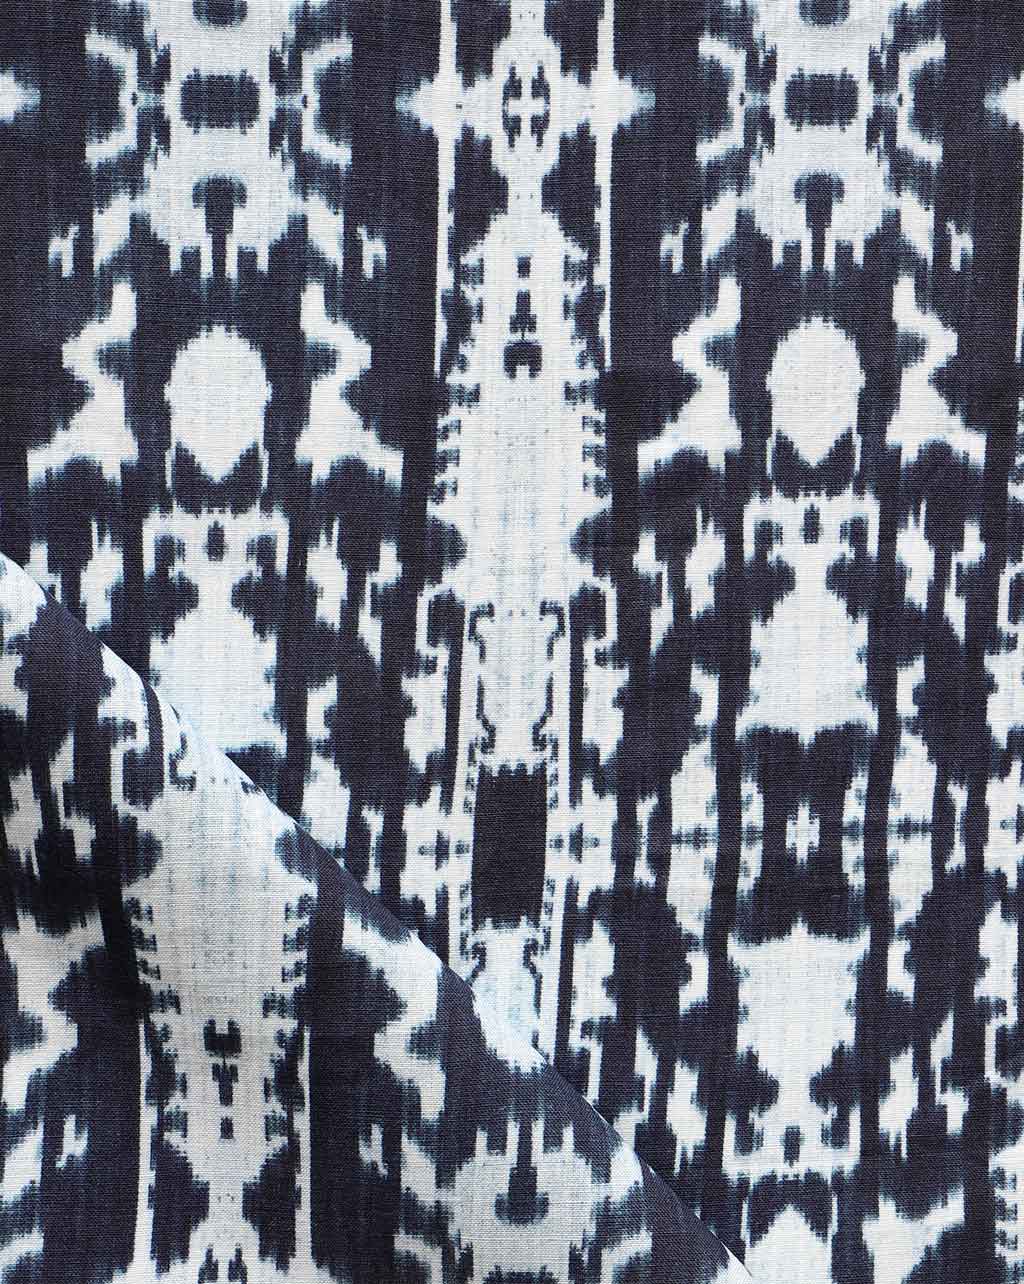 A close up of a high-end black and white Biami Fabric Indigo Ikat fabric with the Biami pattern